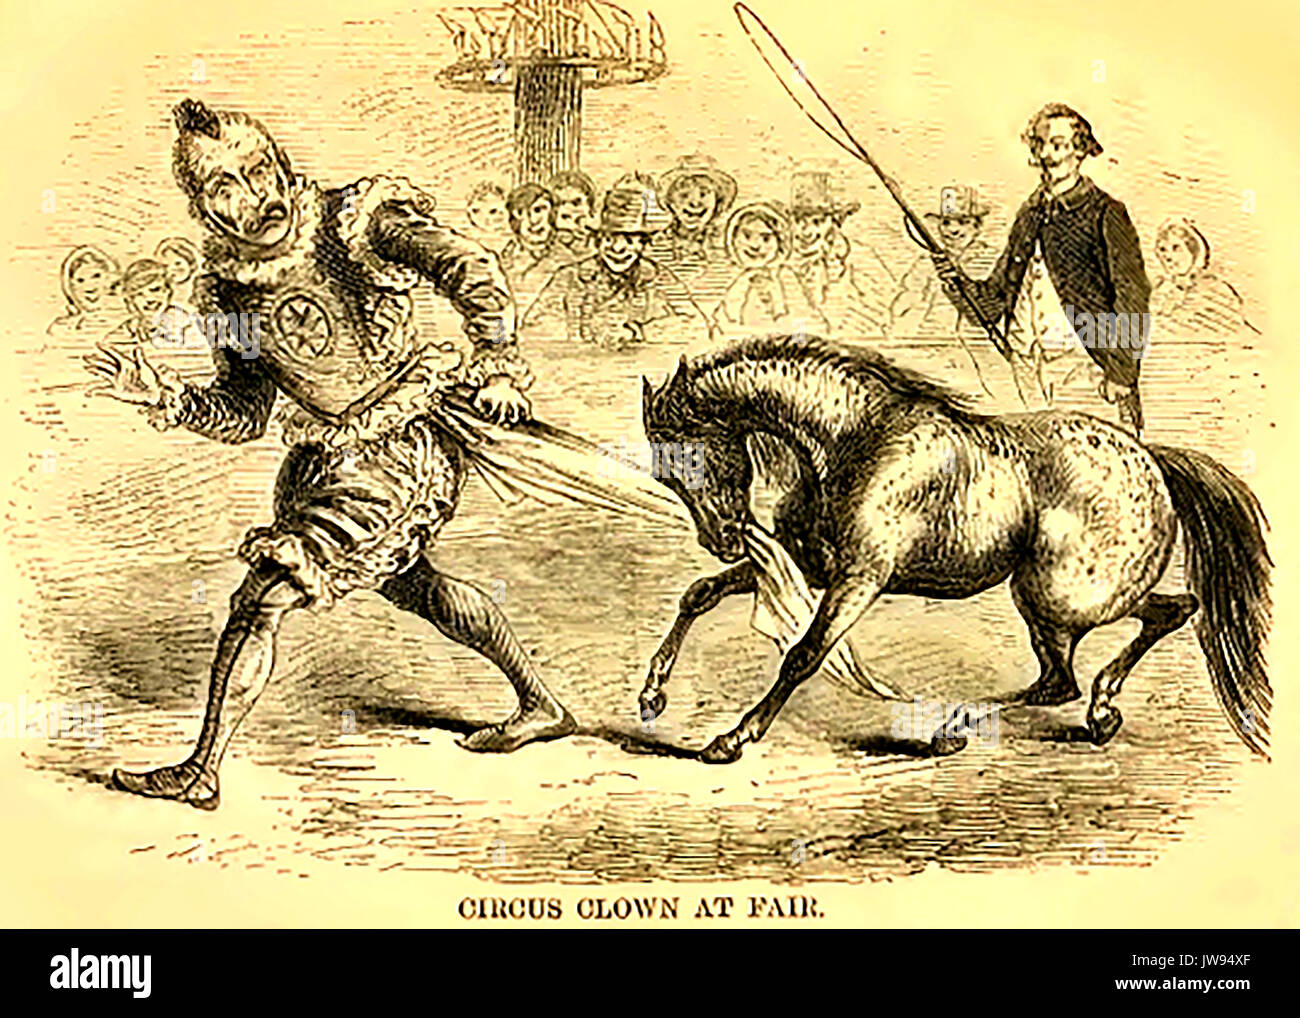 A Victorian English circus clown performing at a fair with a Shetland Pony and ringmaster Stock Photo